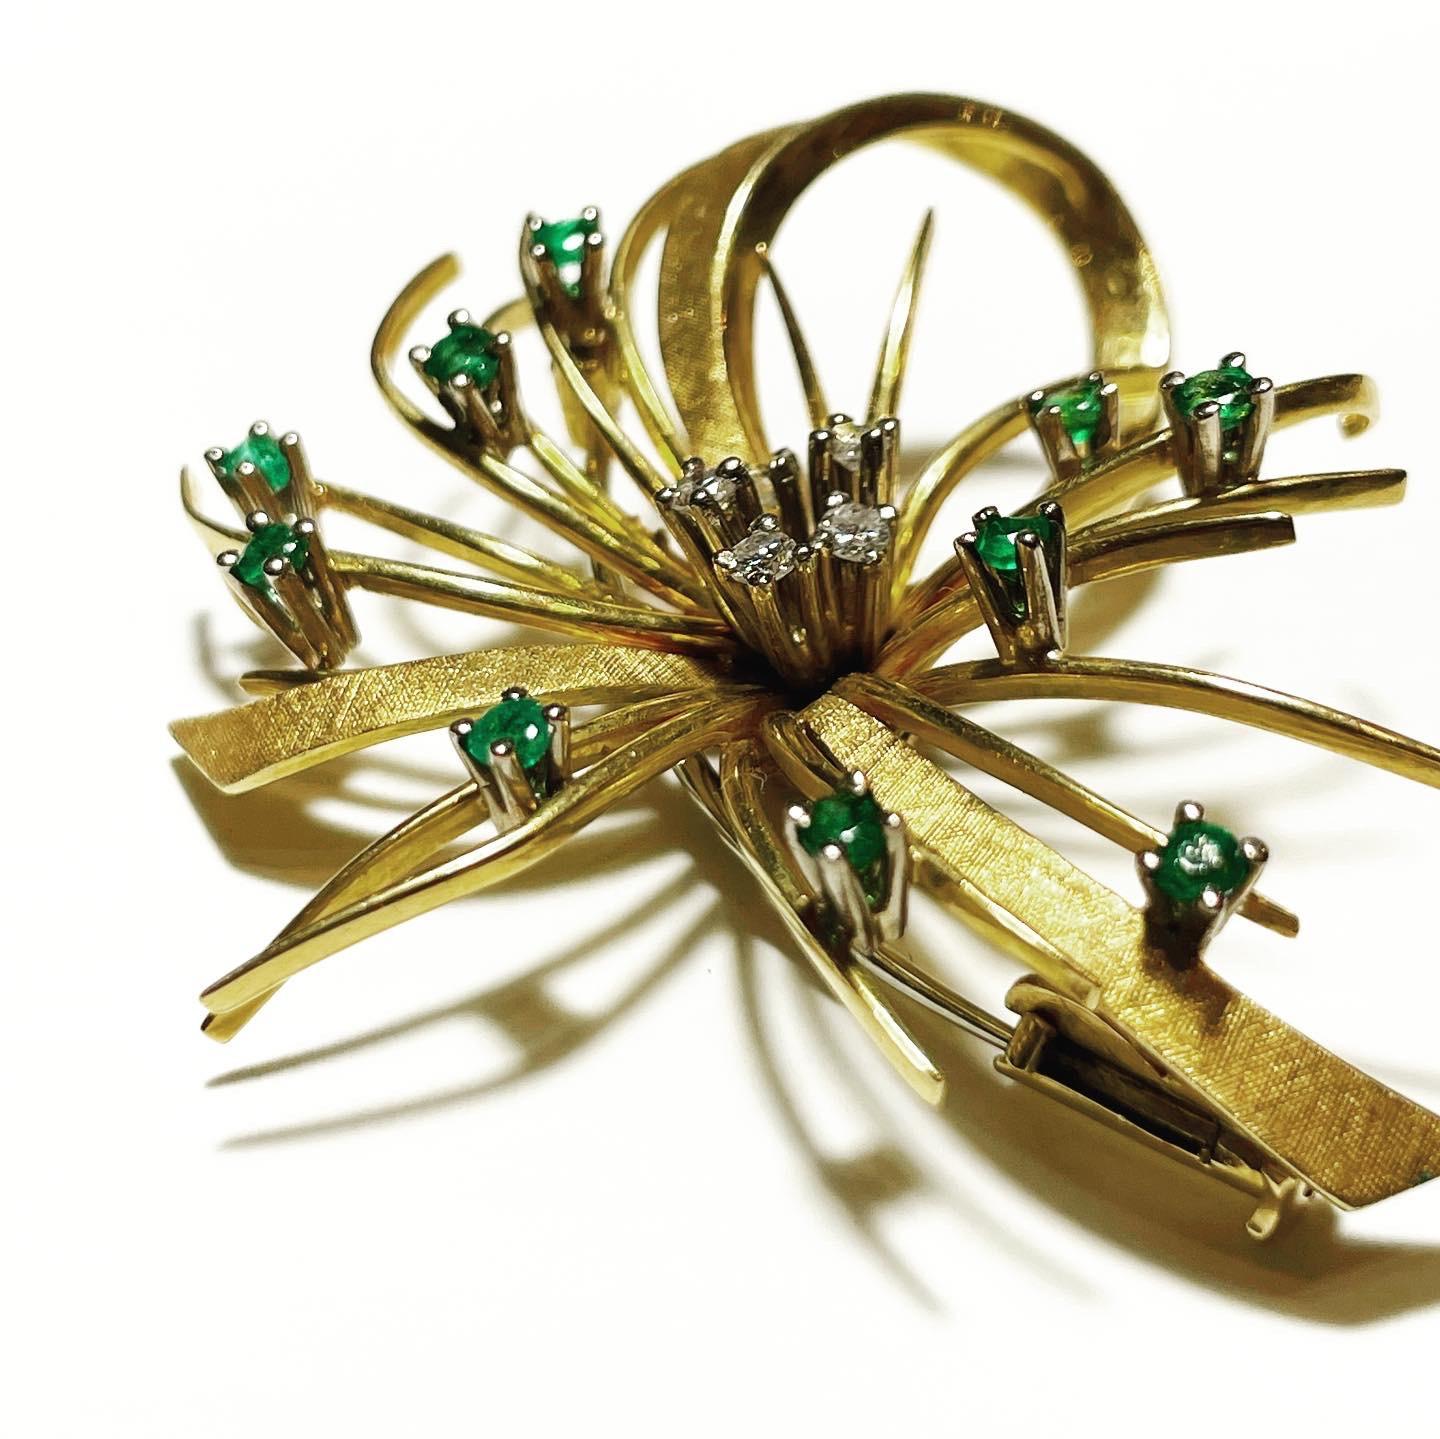 1950s Diamonds and Emeralds nuanced 18k yellow gold stylized ribbon brooch, 
Total approximate weight of the diamonds:  0.2 carat.
Total approximate weight of the emeralds:  0.5 carat.
Total weight of the jewel: 13 g.
Perfect condition.

FREE